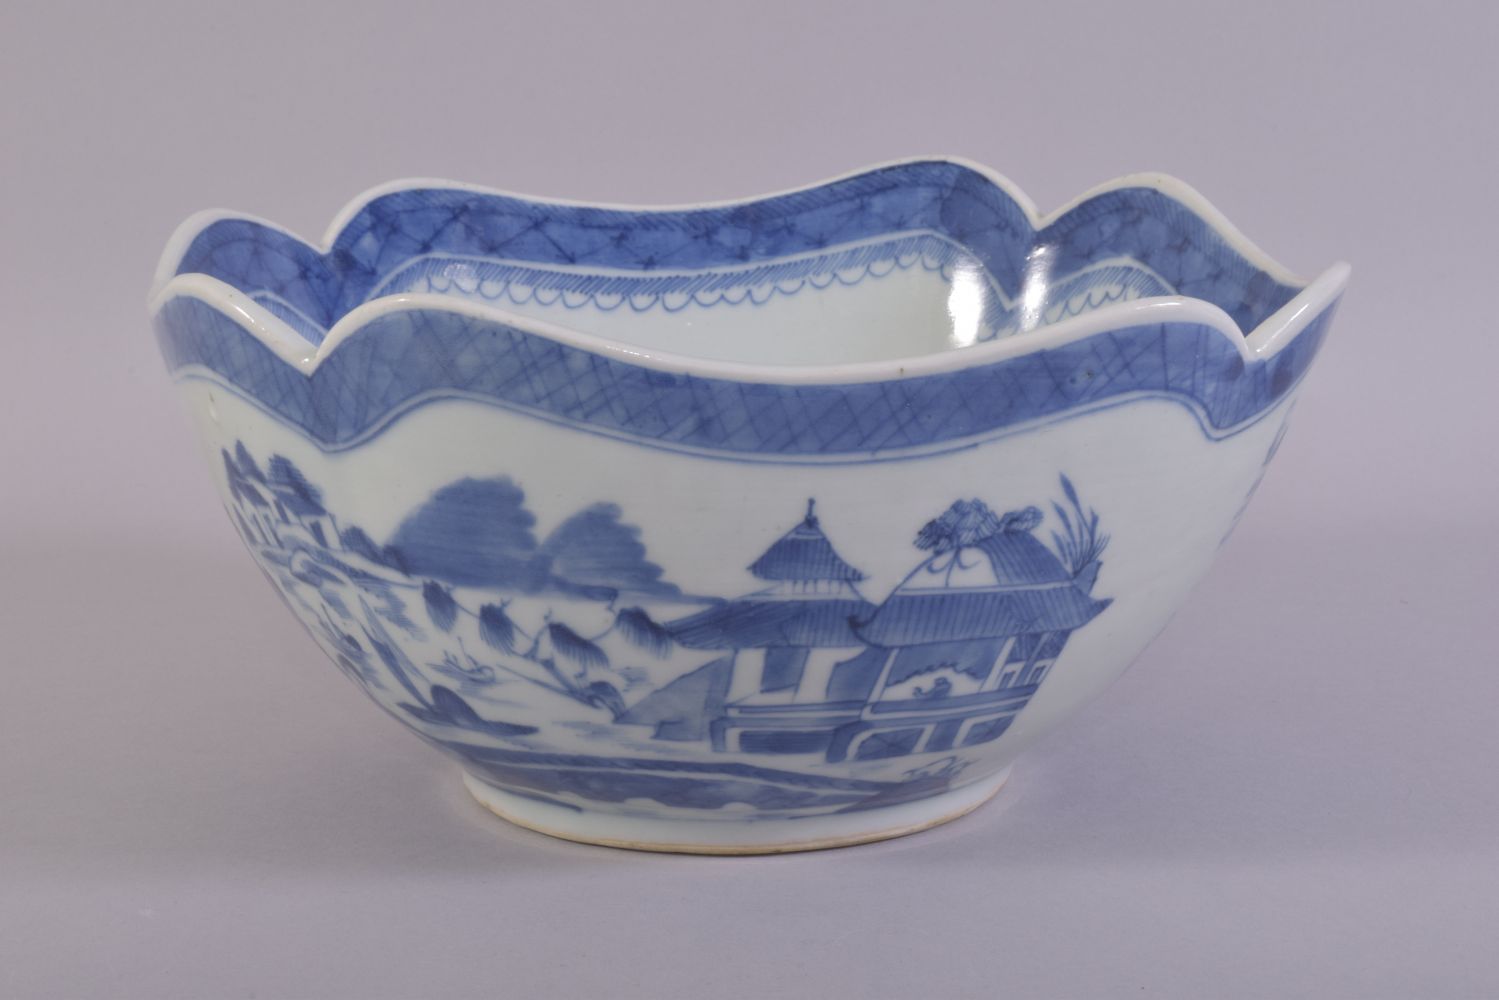 A CHINESE BLUE AND WHITE PORCELAIN BOWL, decorated with a landscape including buildings, boats and - Image 3 of 6